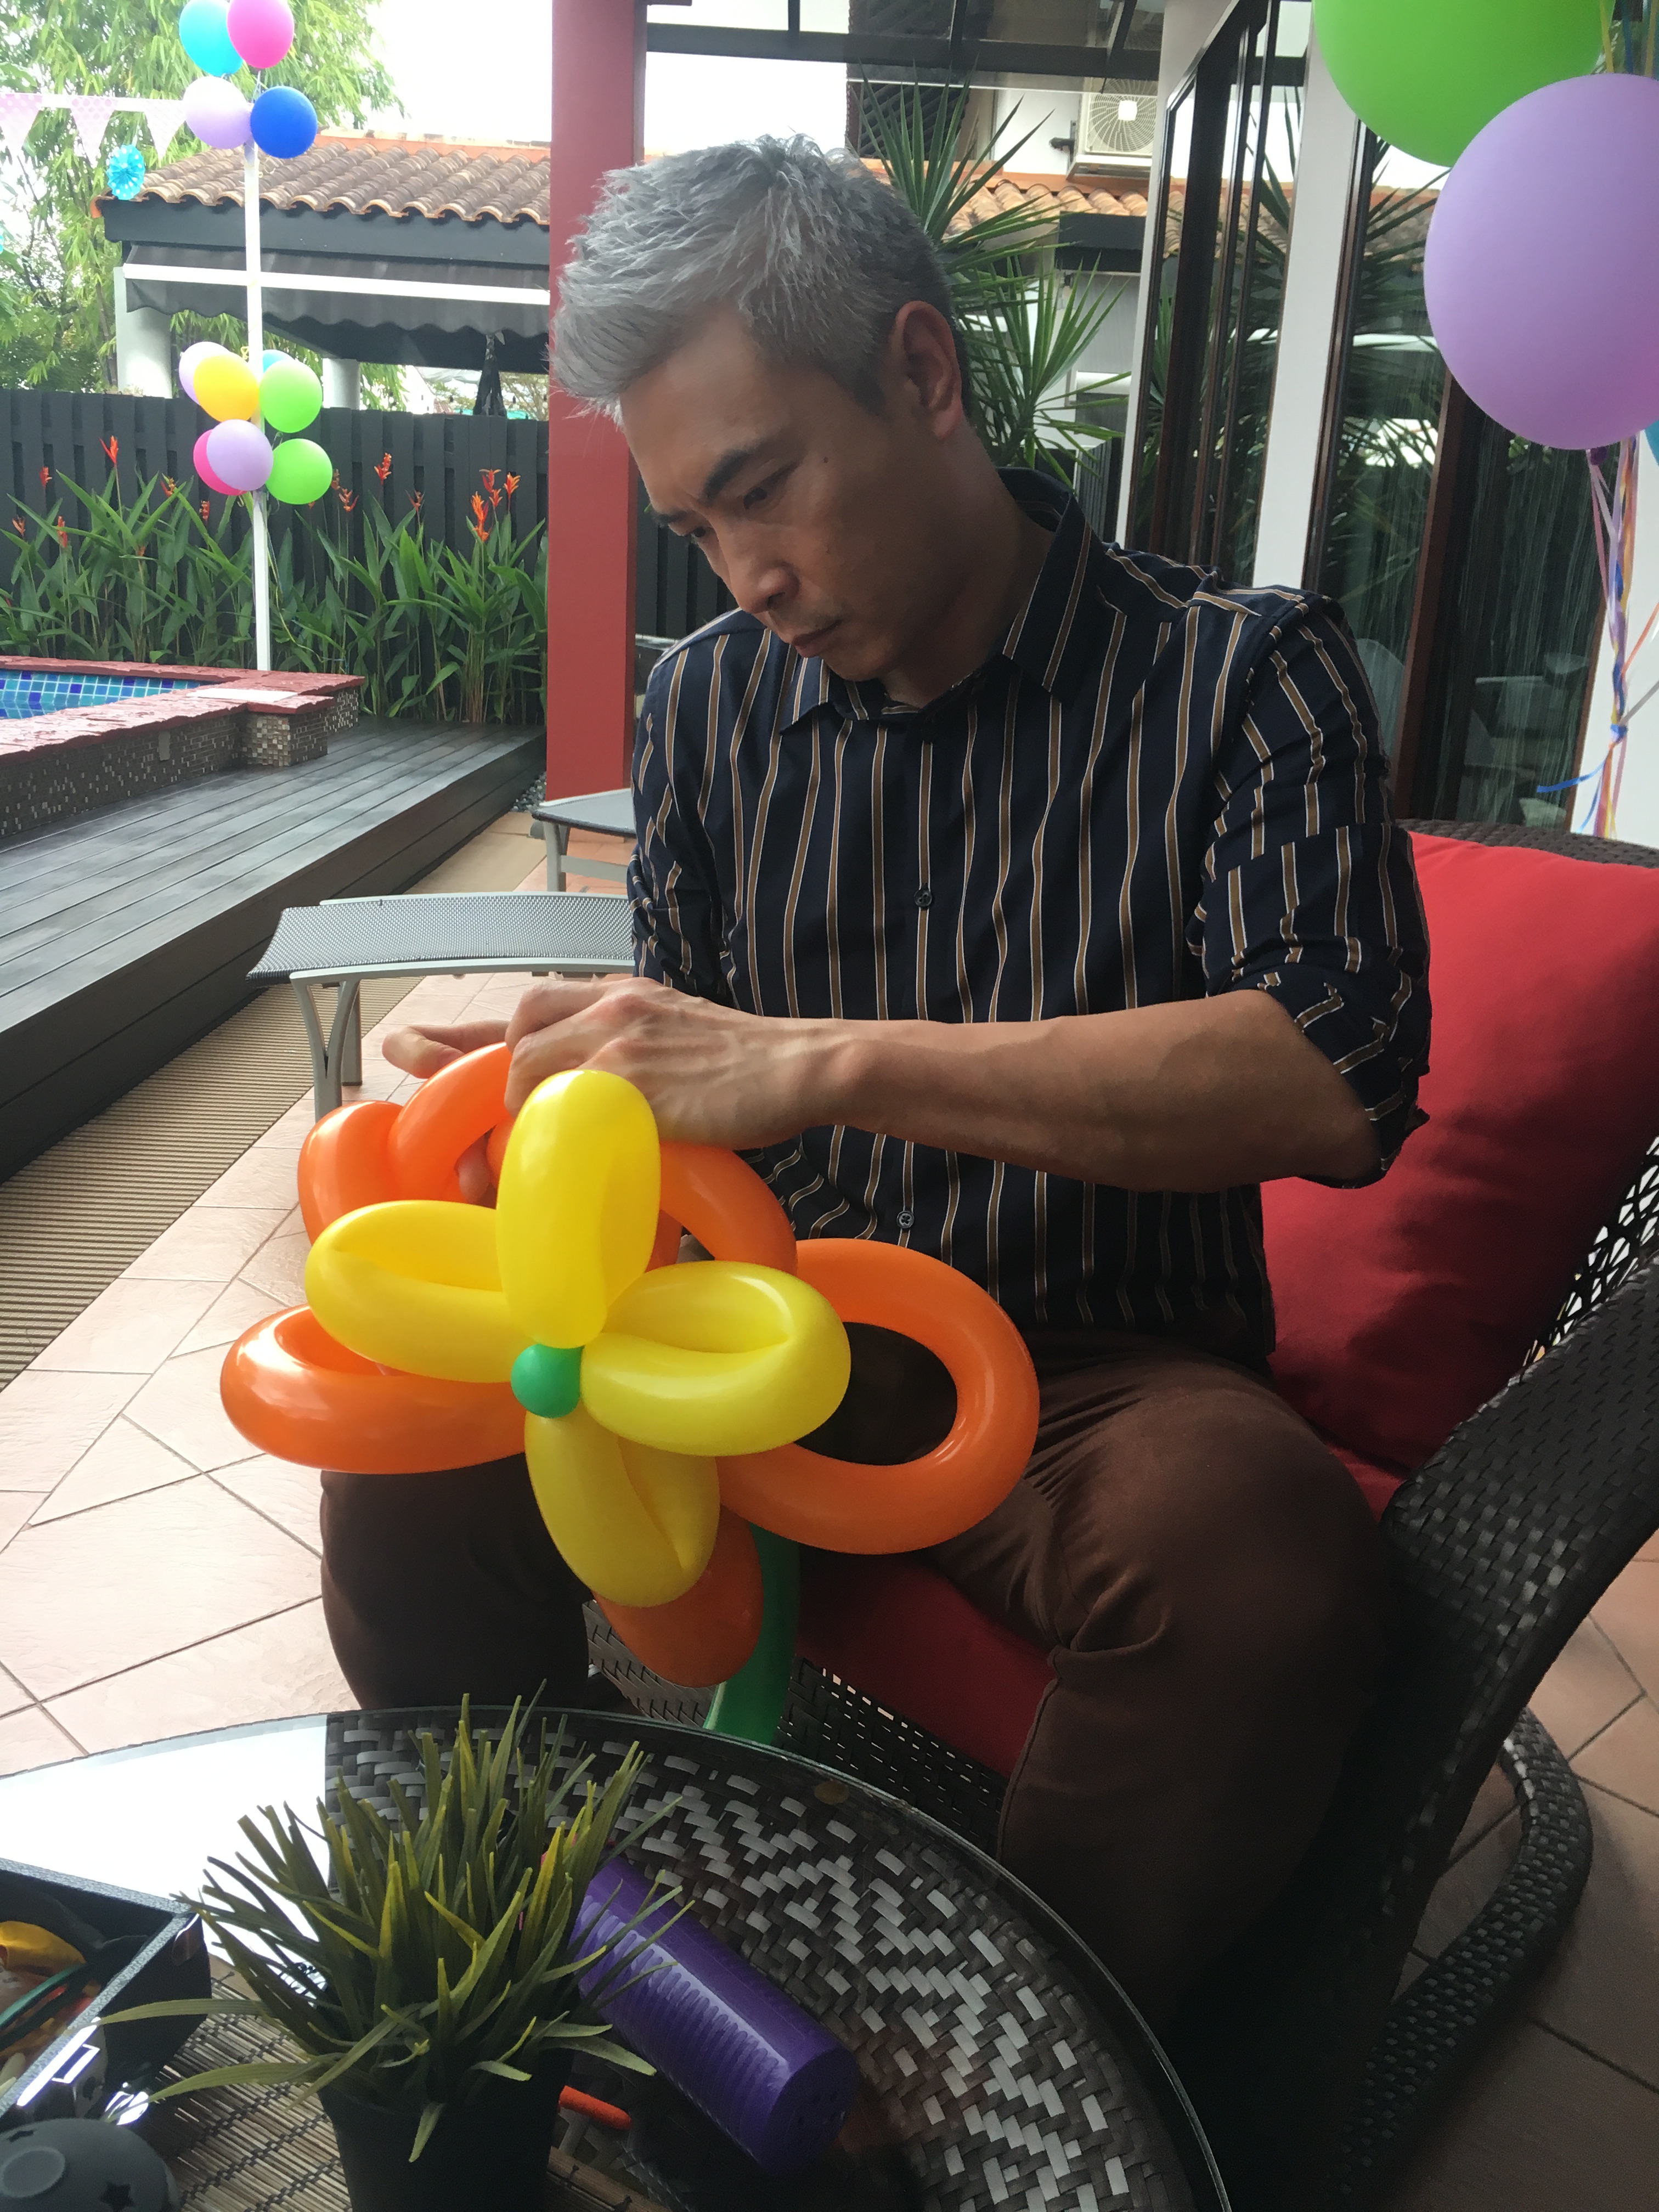 Tay Ping Hui tries to learn balloon sculpting in his free time